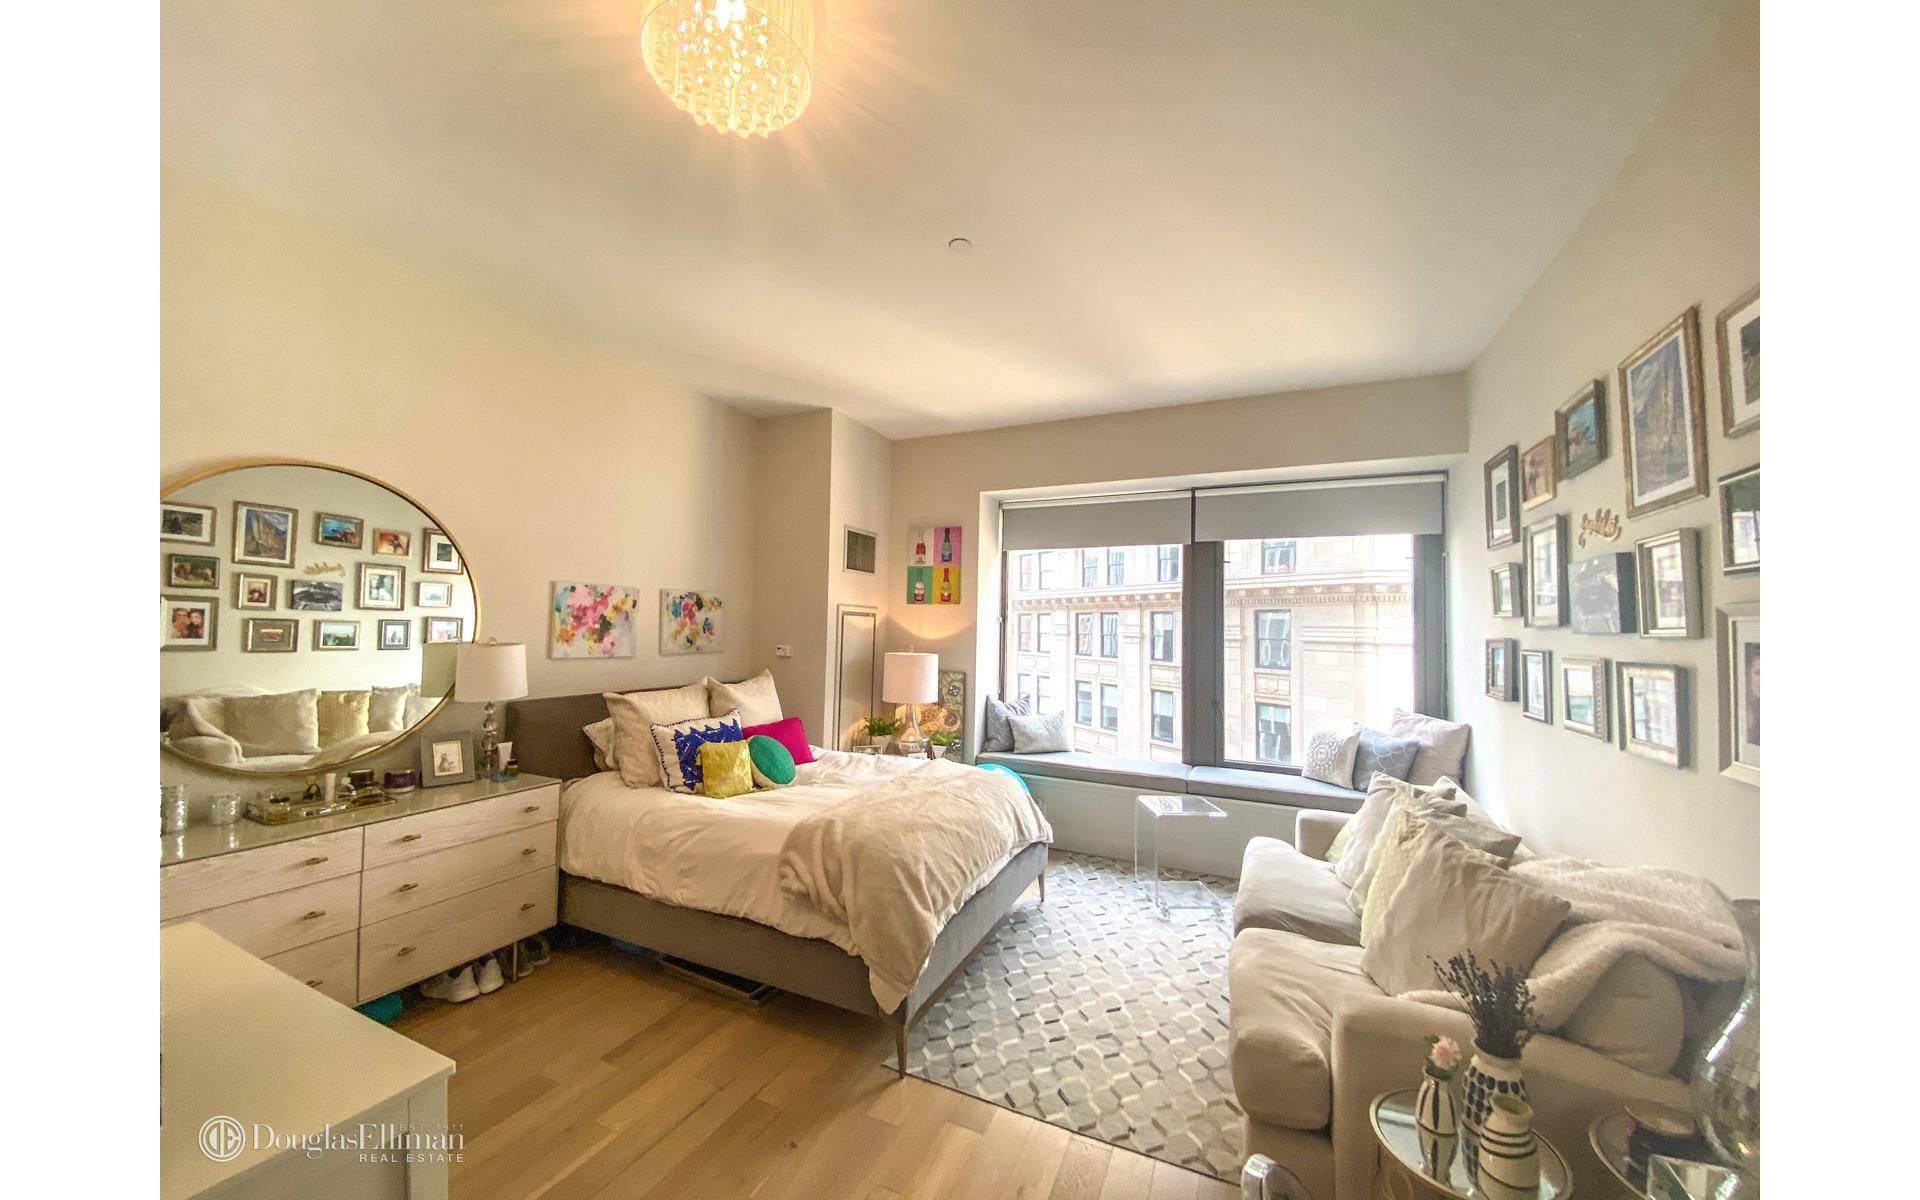 This Sunny High Floor Studio with Open West Exposure has 10' high ceilings, wide plank floor, oversized windows and it offers comfort and unparalleled services of 5 Star Hotel Apartment ...